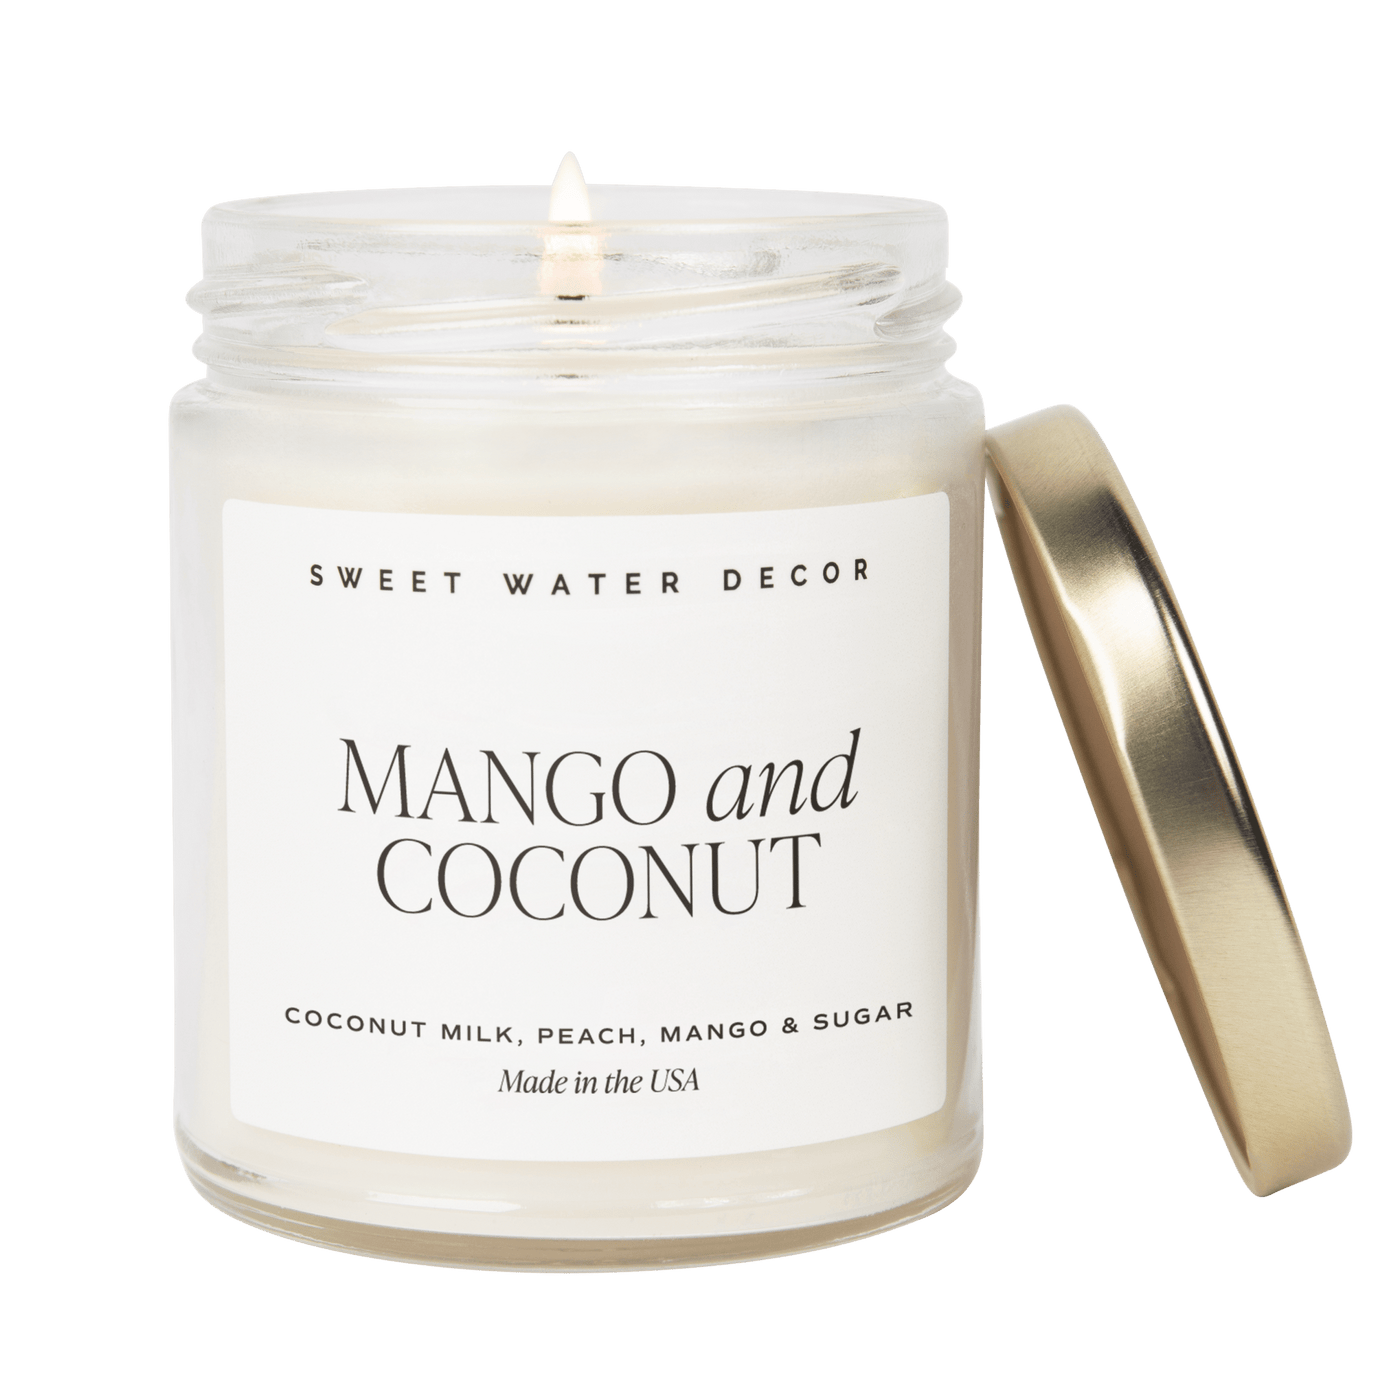 Mango and Coconut Soy Candle - Clear Jar - 9 oz - Sweet Water Decor - Candles